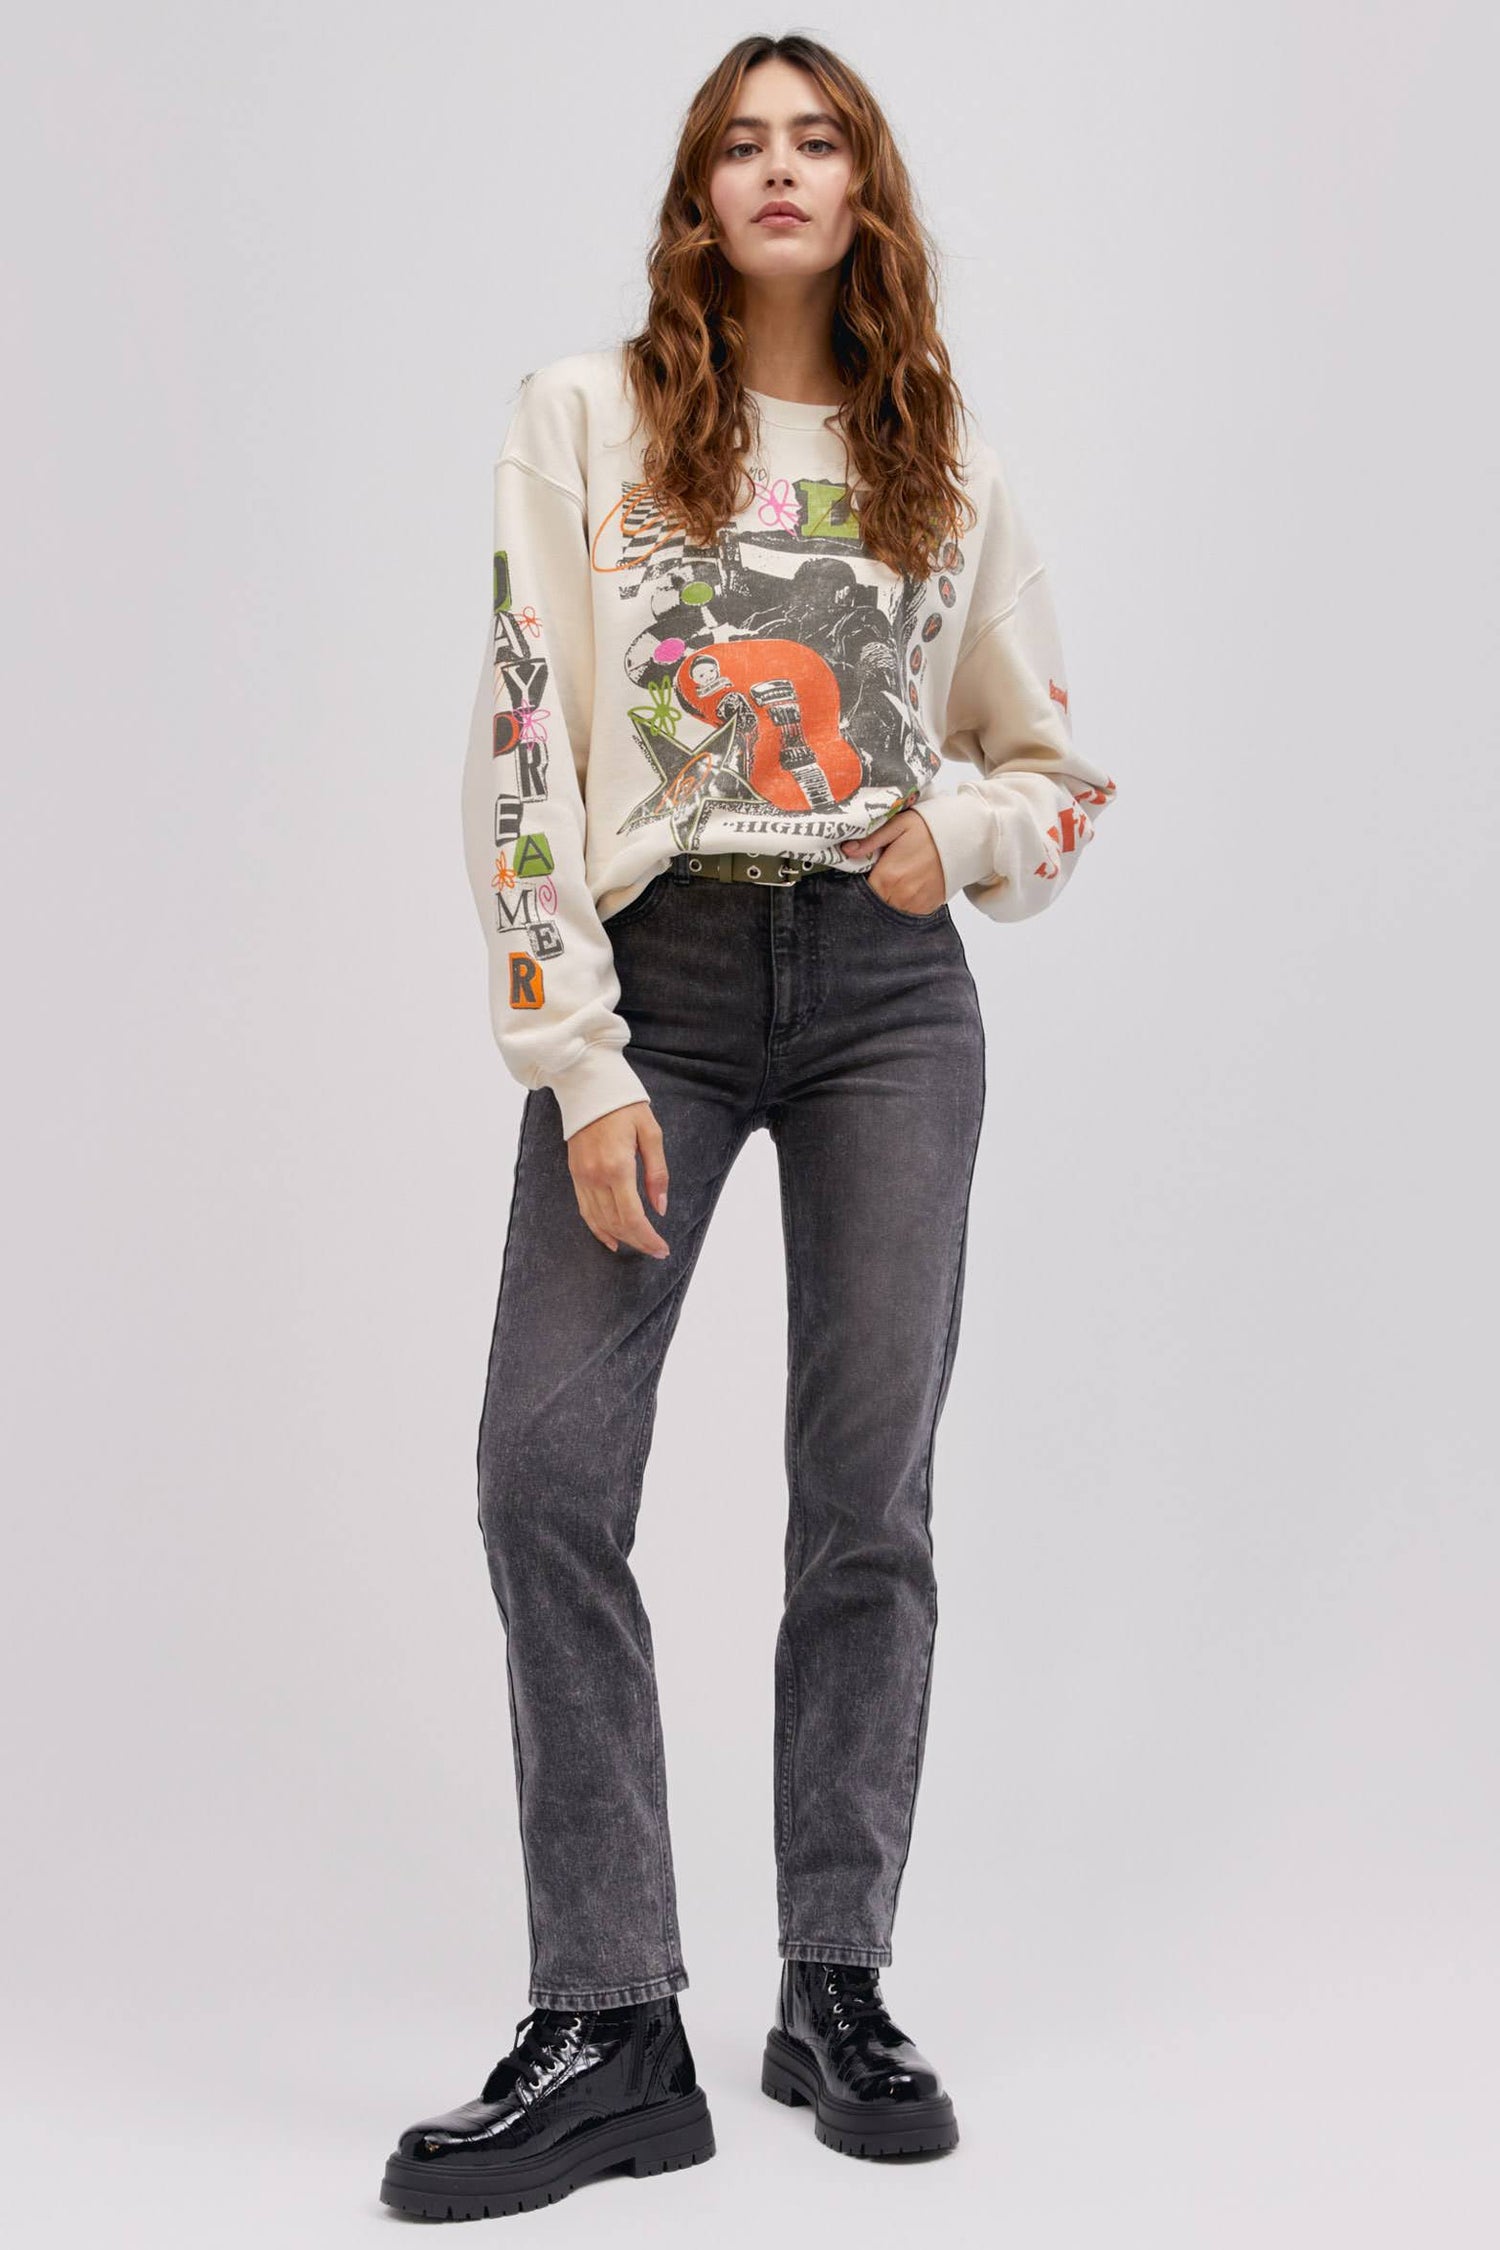 model in standing pose with hand in pocket wearing a graphic sweatshirt and washed denim jeans